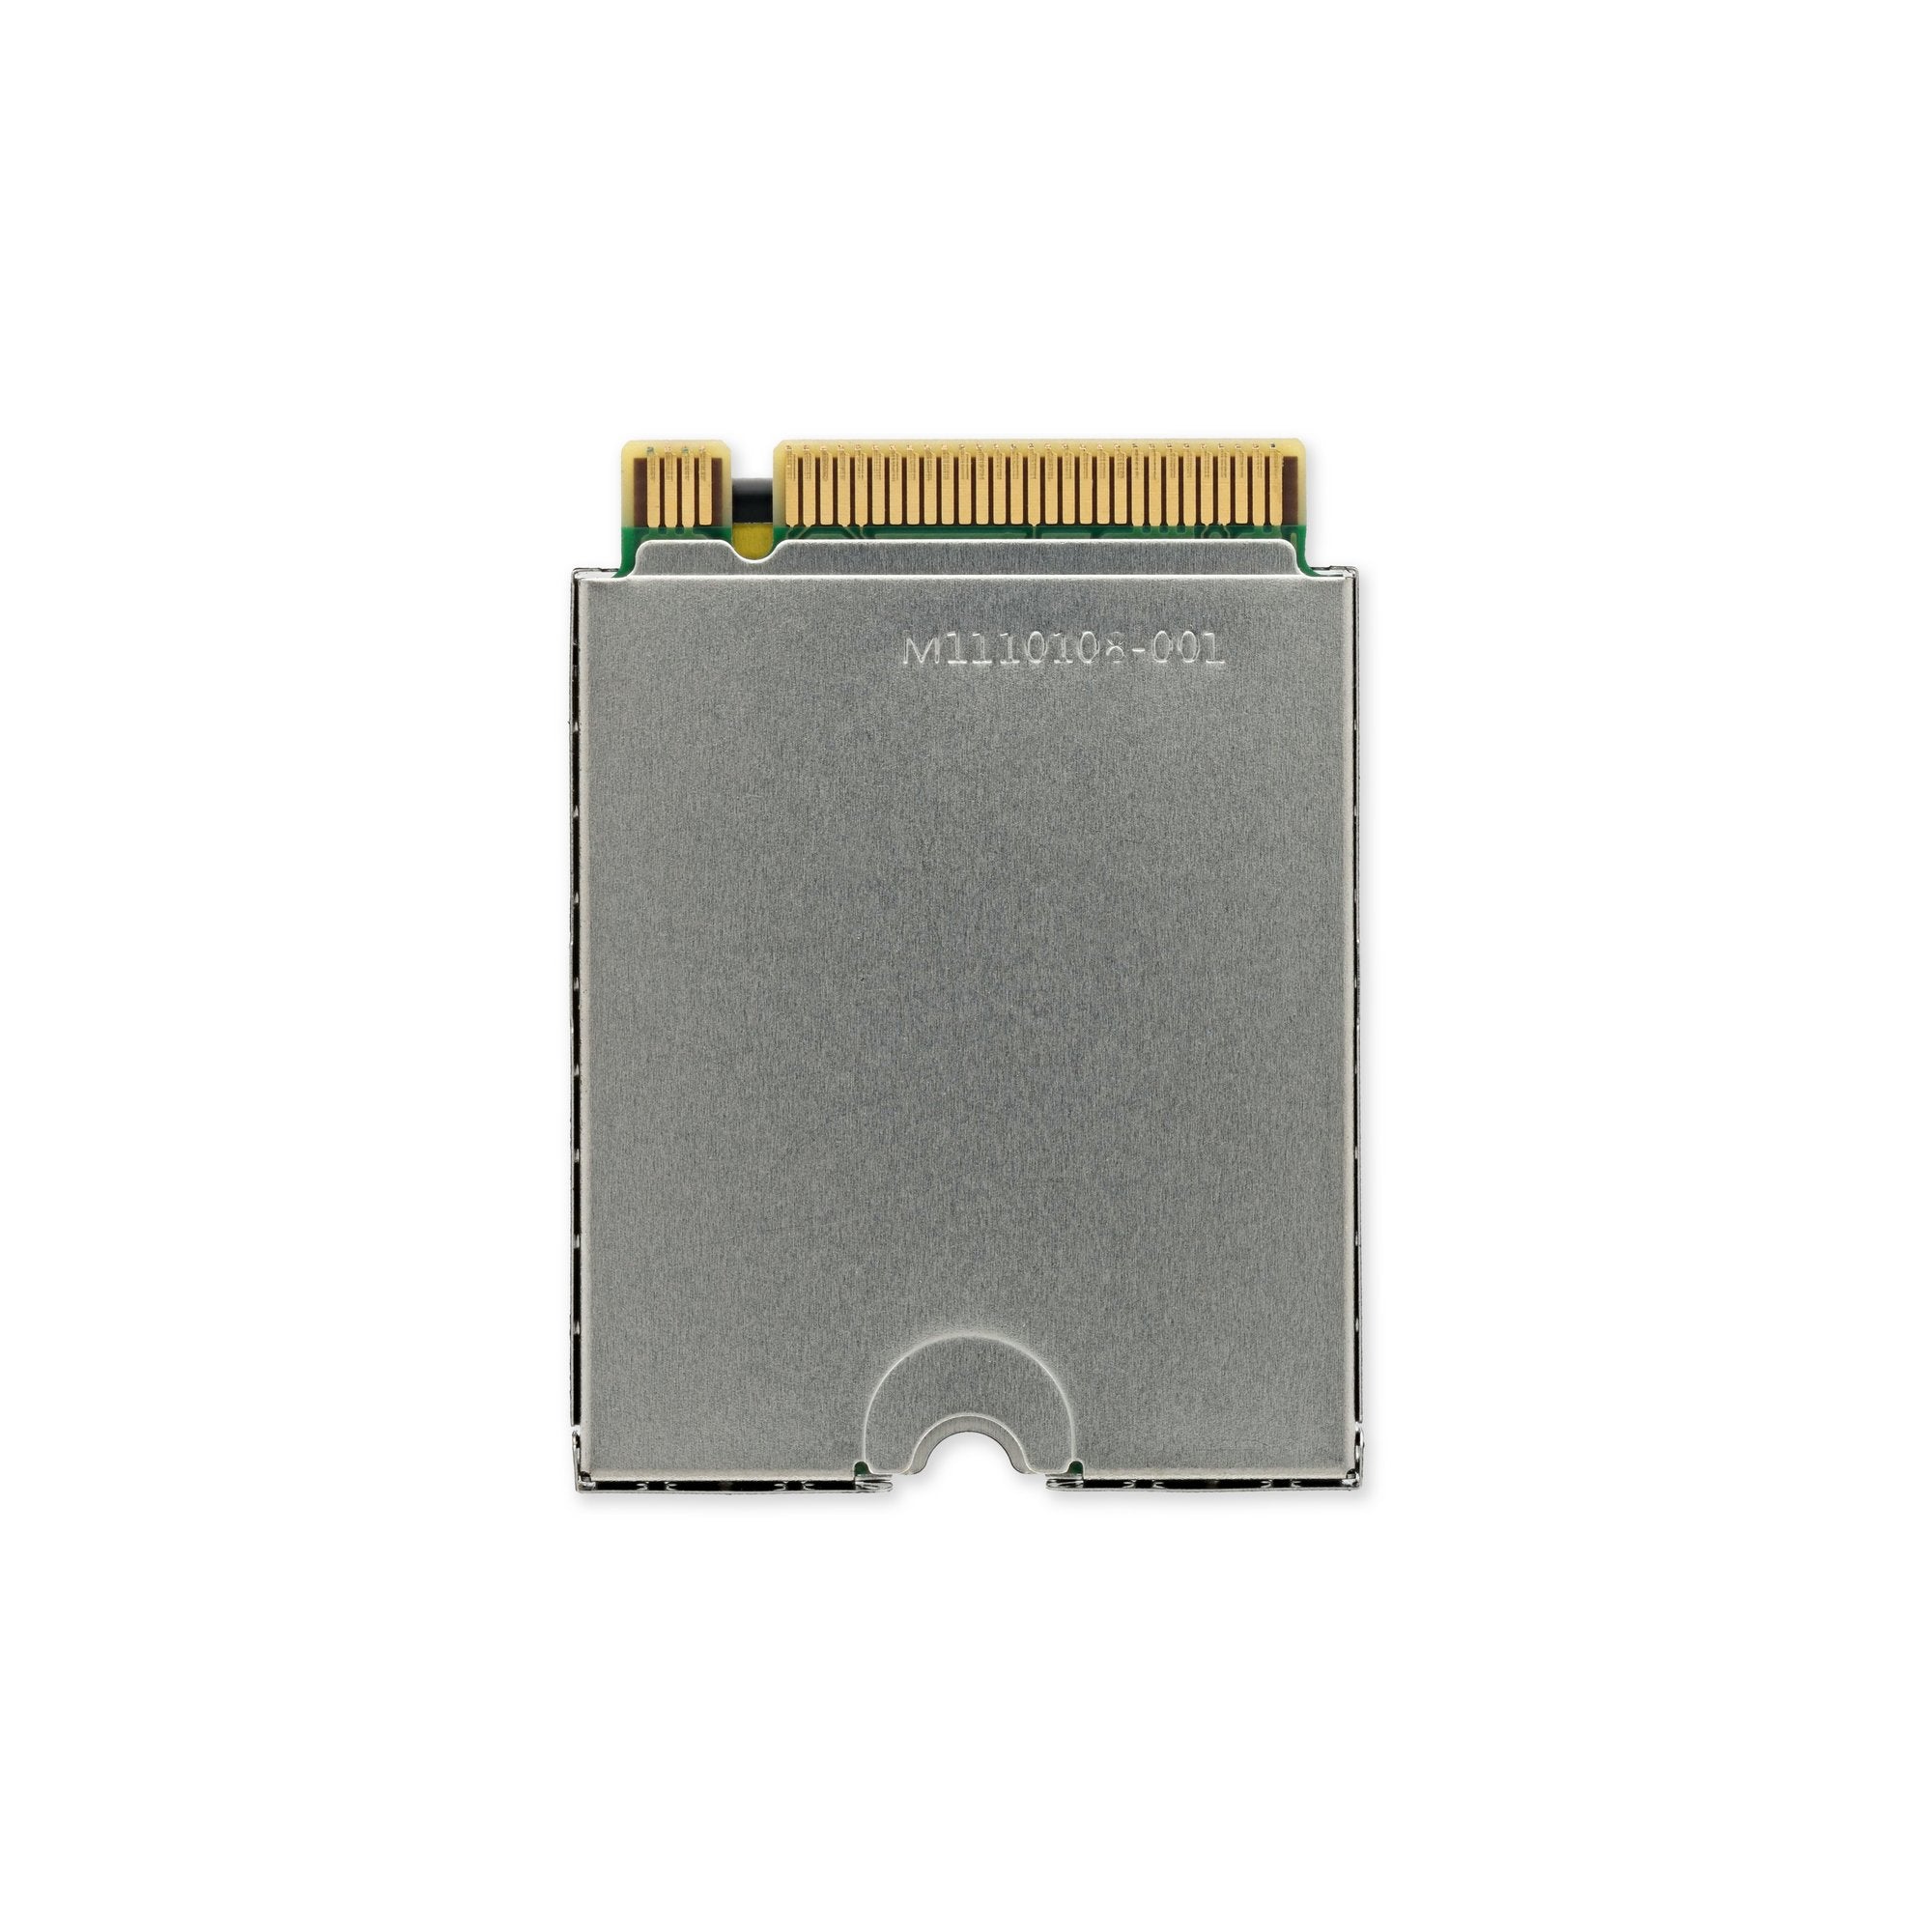 Surface Pro X (Model 1876-SQ1) SSD - Genuine 512 GB OEM Part Only